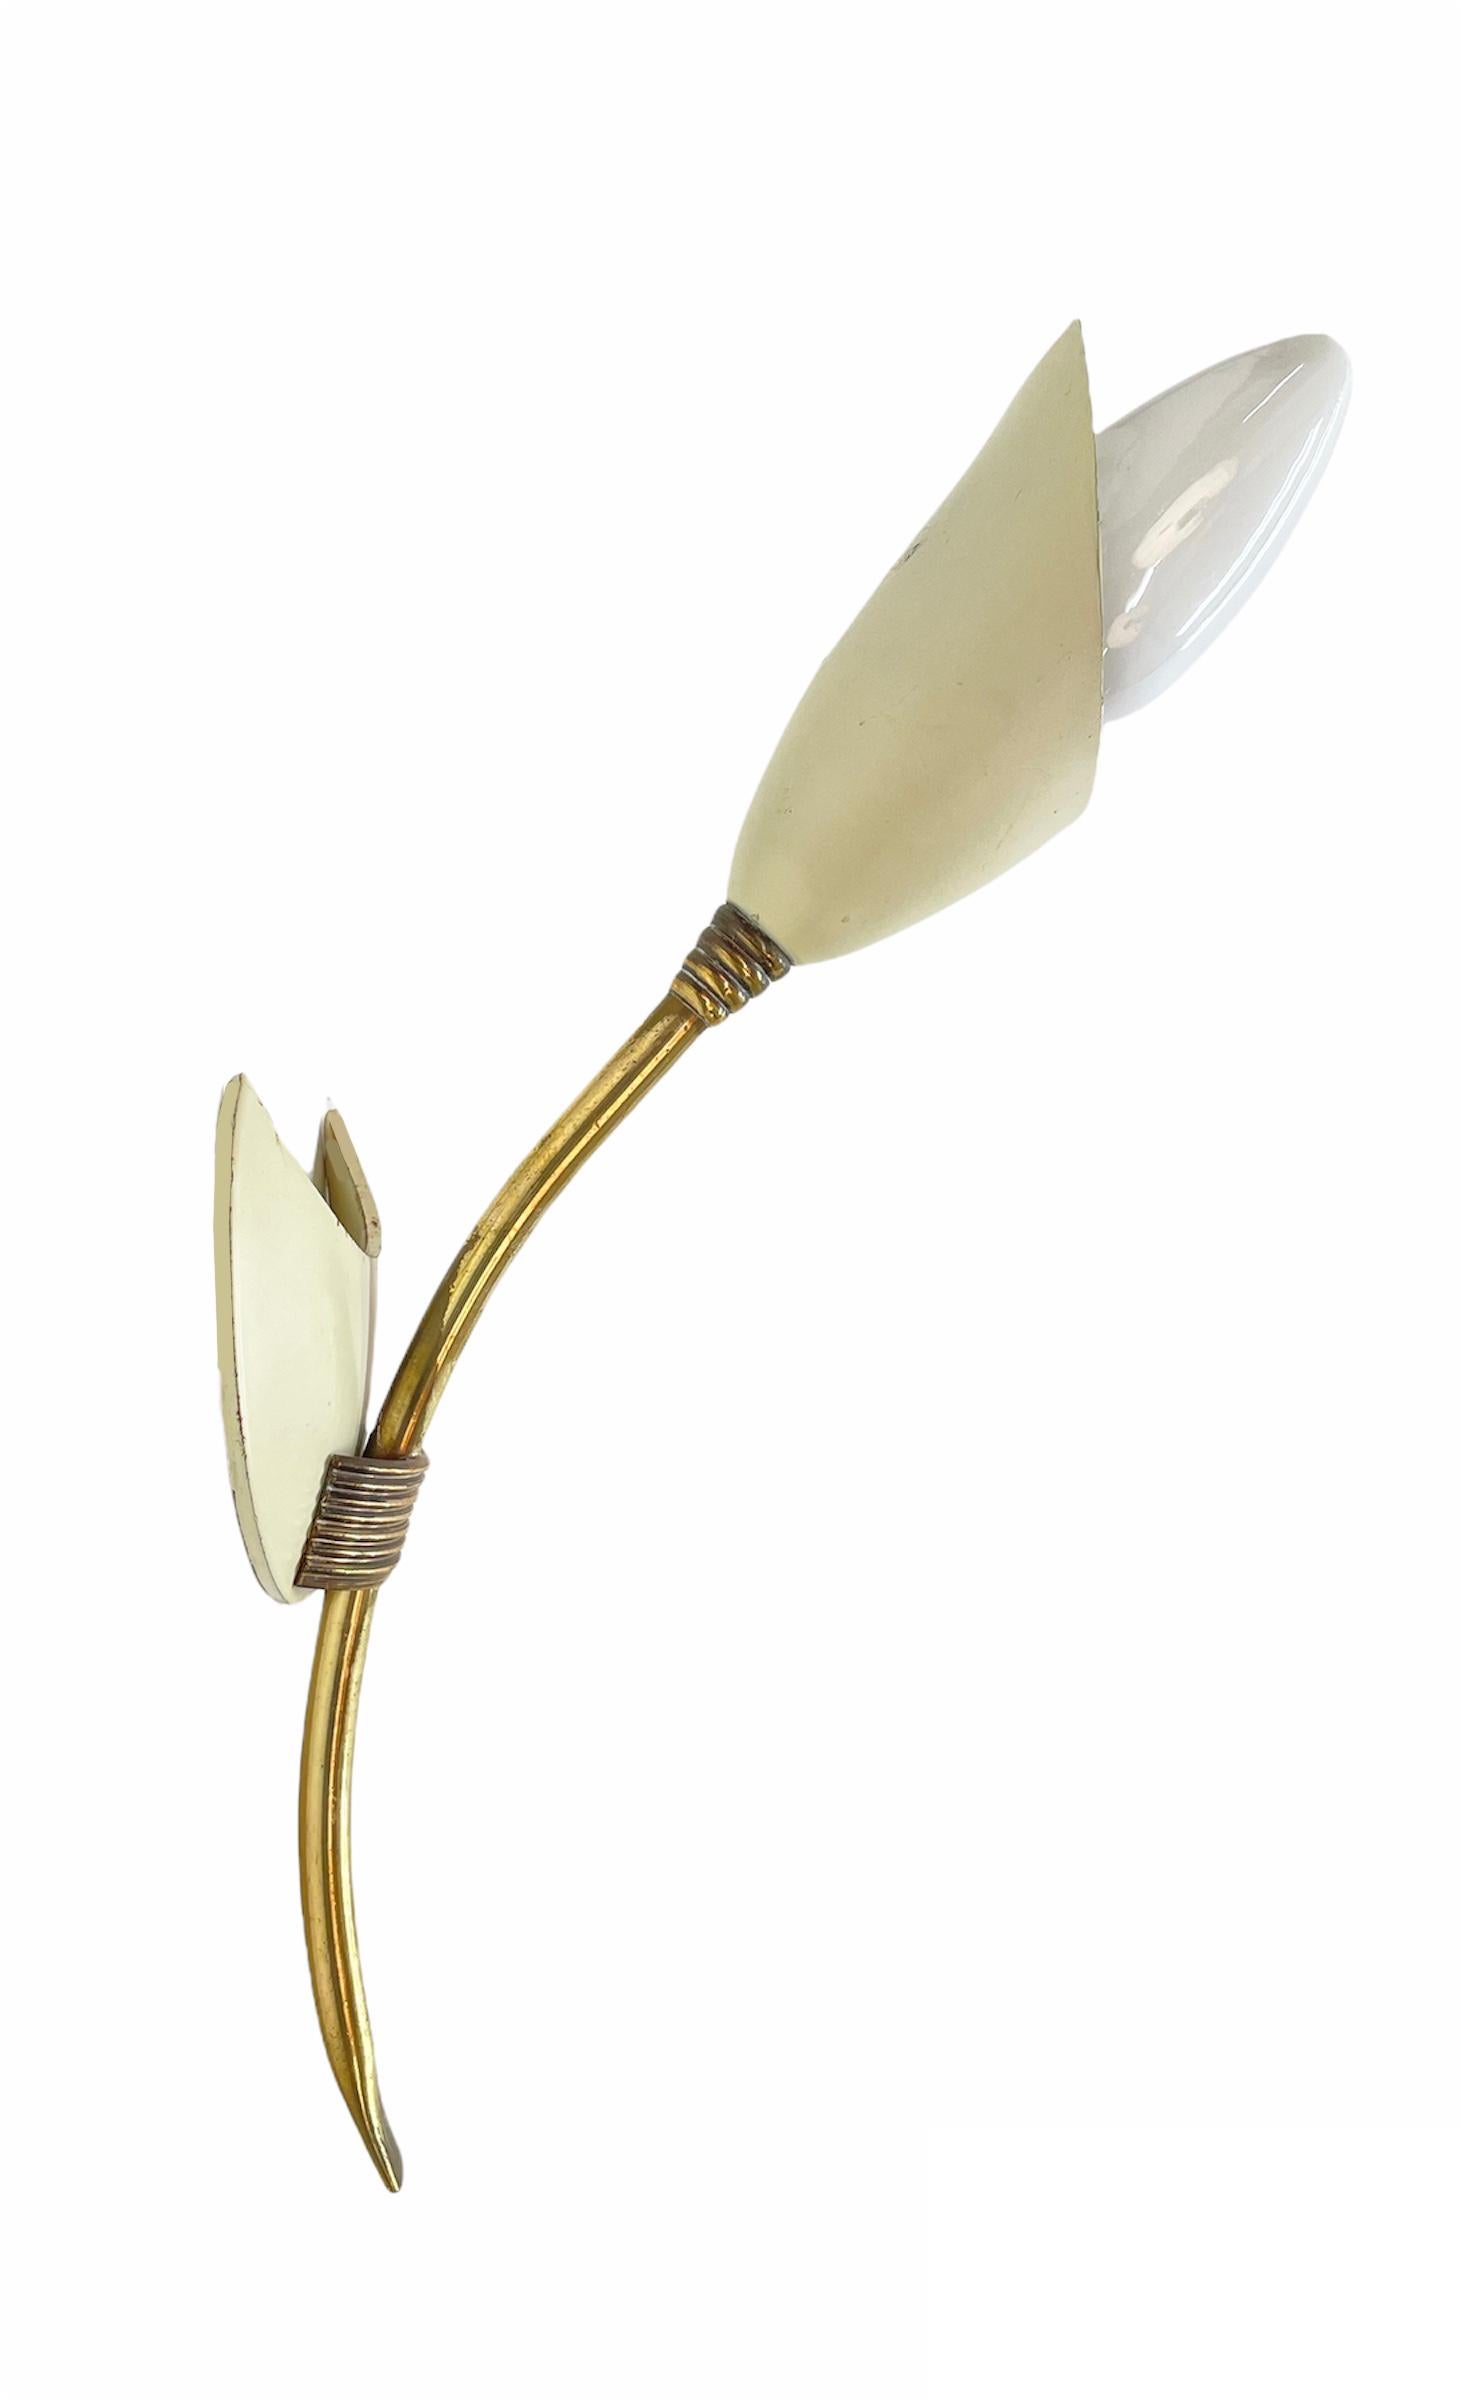 Pair of GCME Midcentury Brass and Enamelled Aluminum Italian Tulip Sconces 1950s For Sale 14